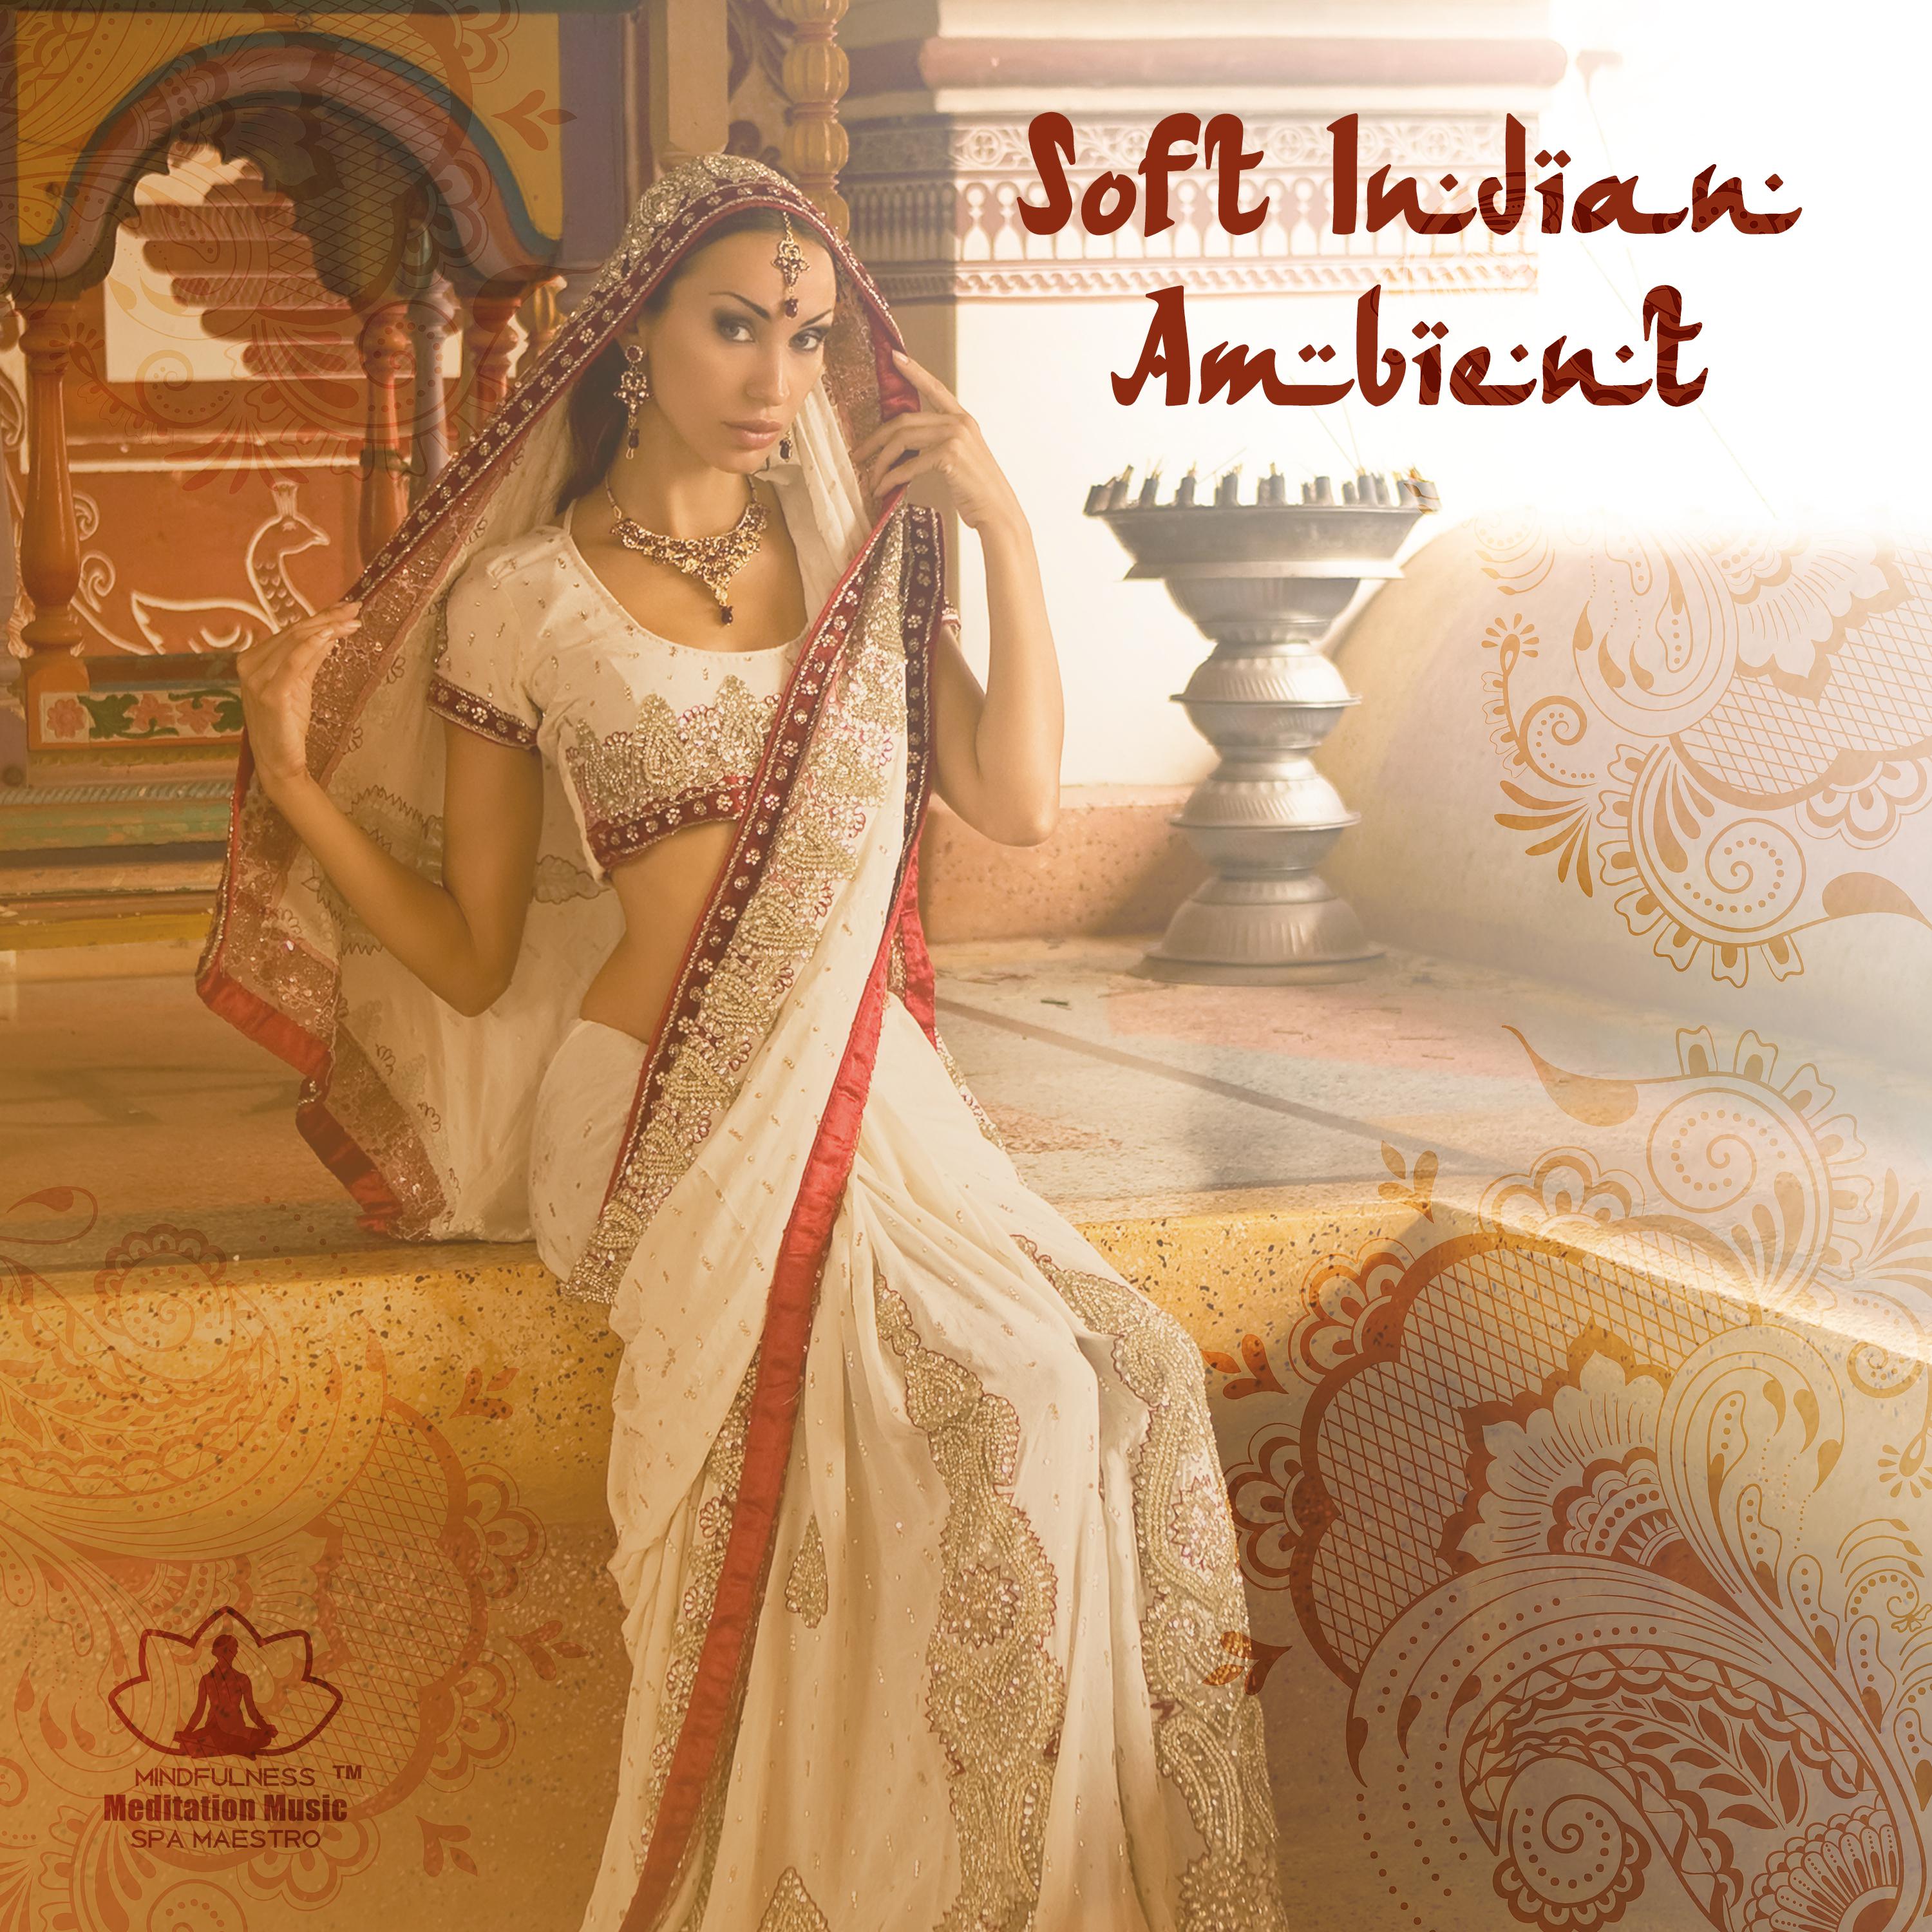 Soft Indian Ambient (Asian Spa Room)